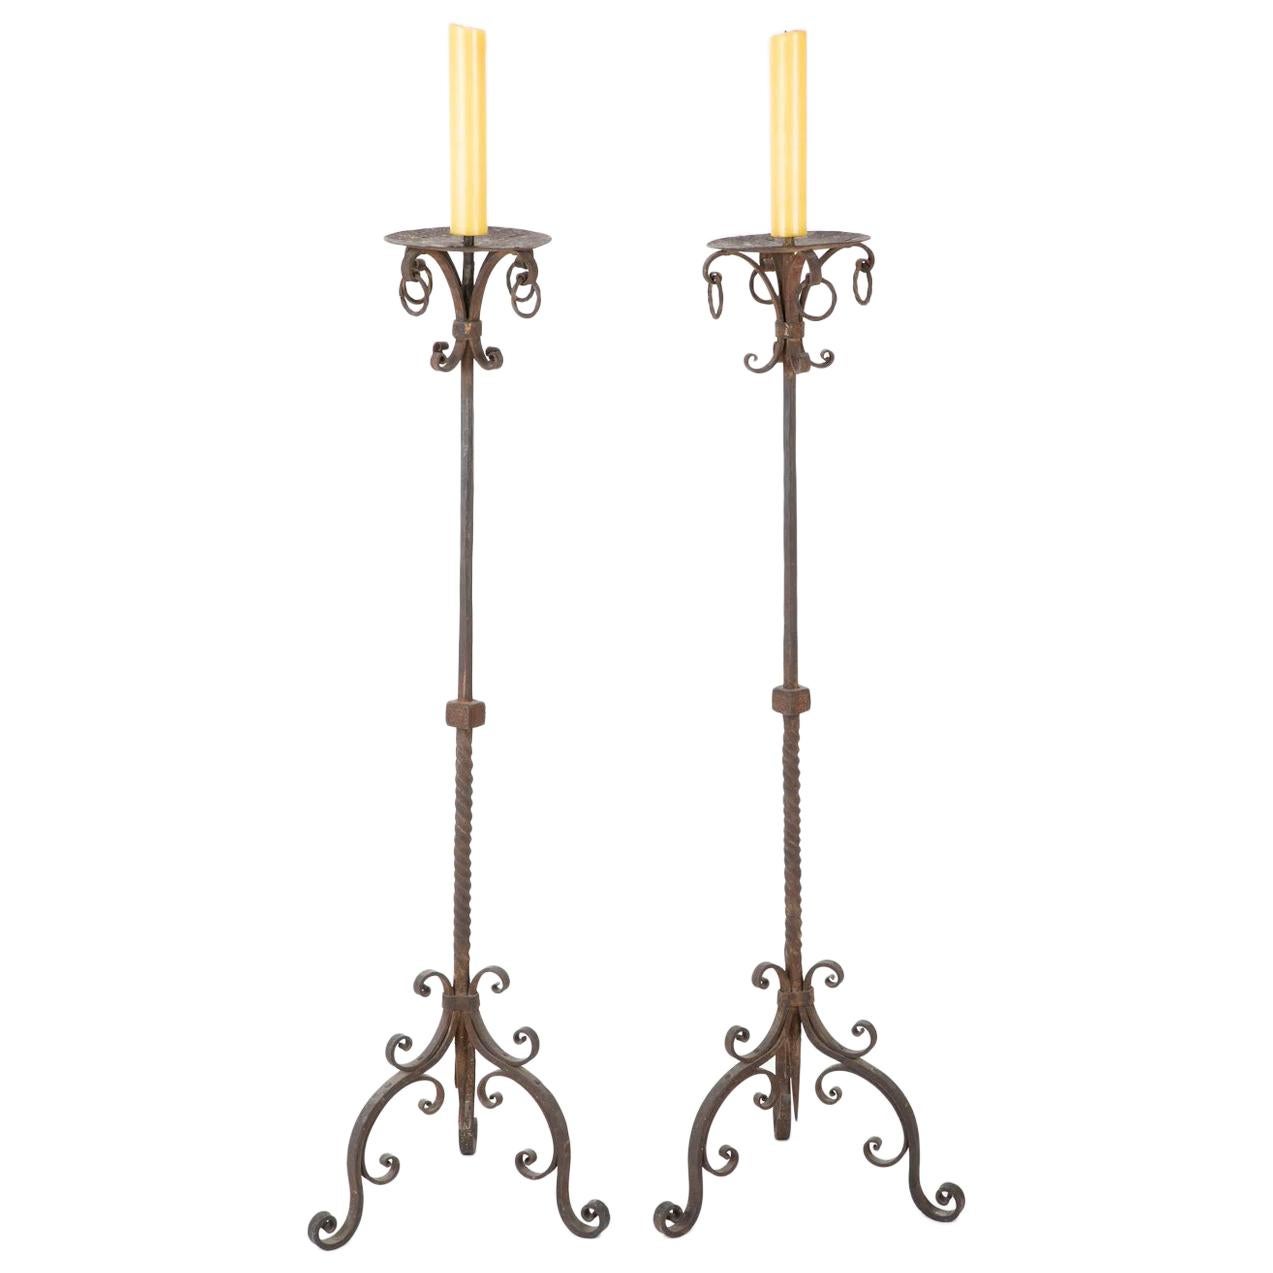 Pair of Spanish Wrought Iron Baroque Style Torcheres